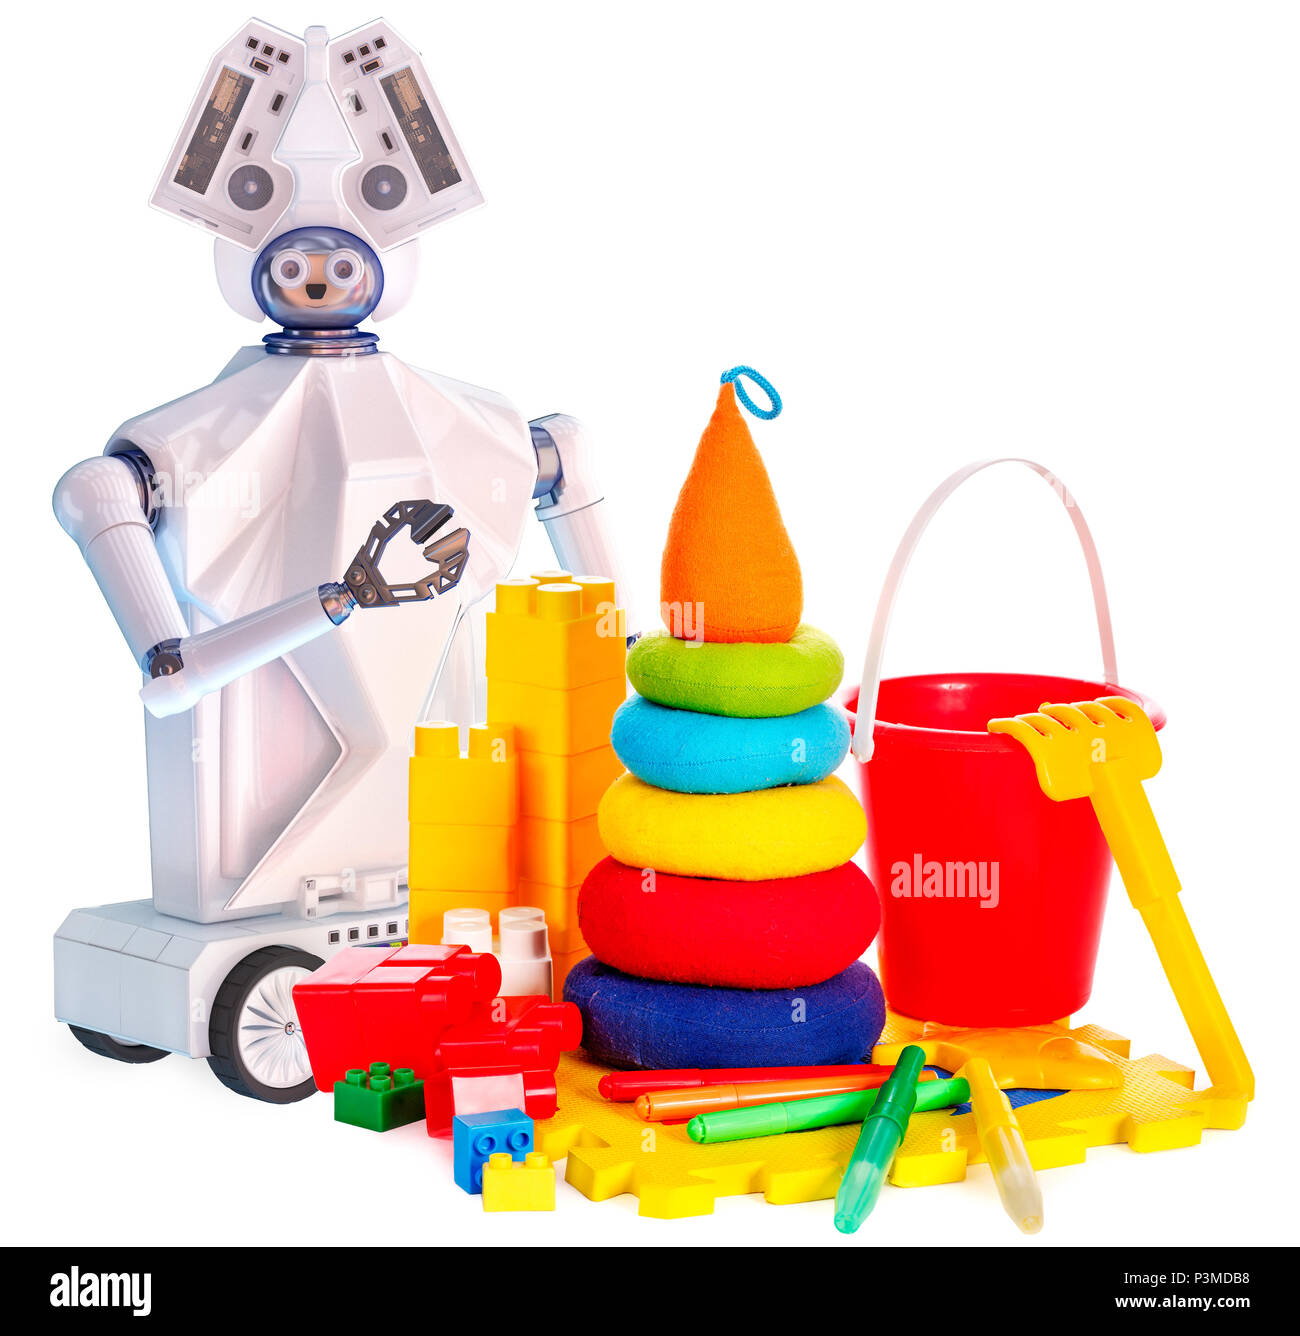 Robot toy on wheels and kids plastic toys. Stock Photo